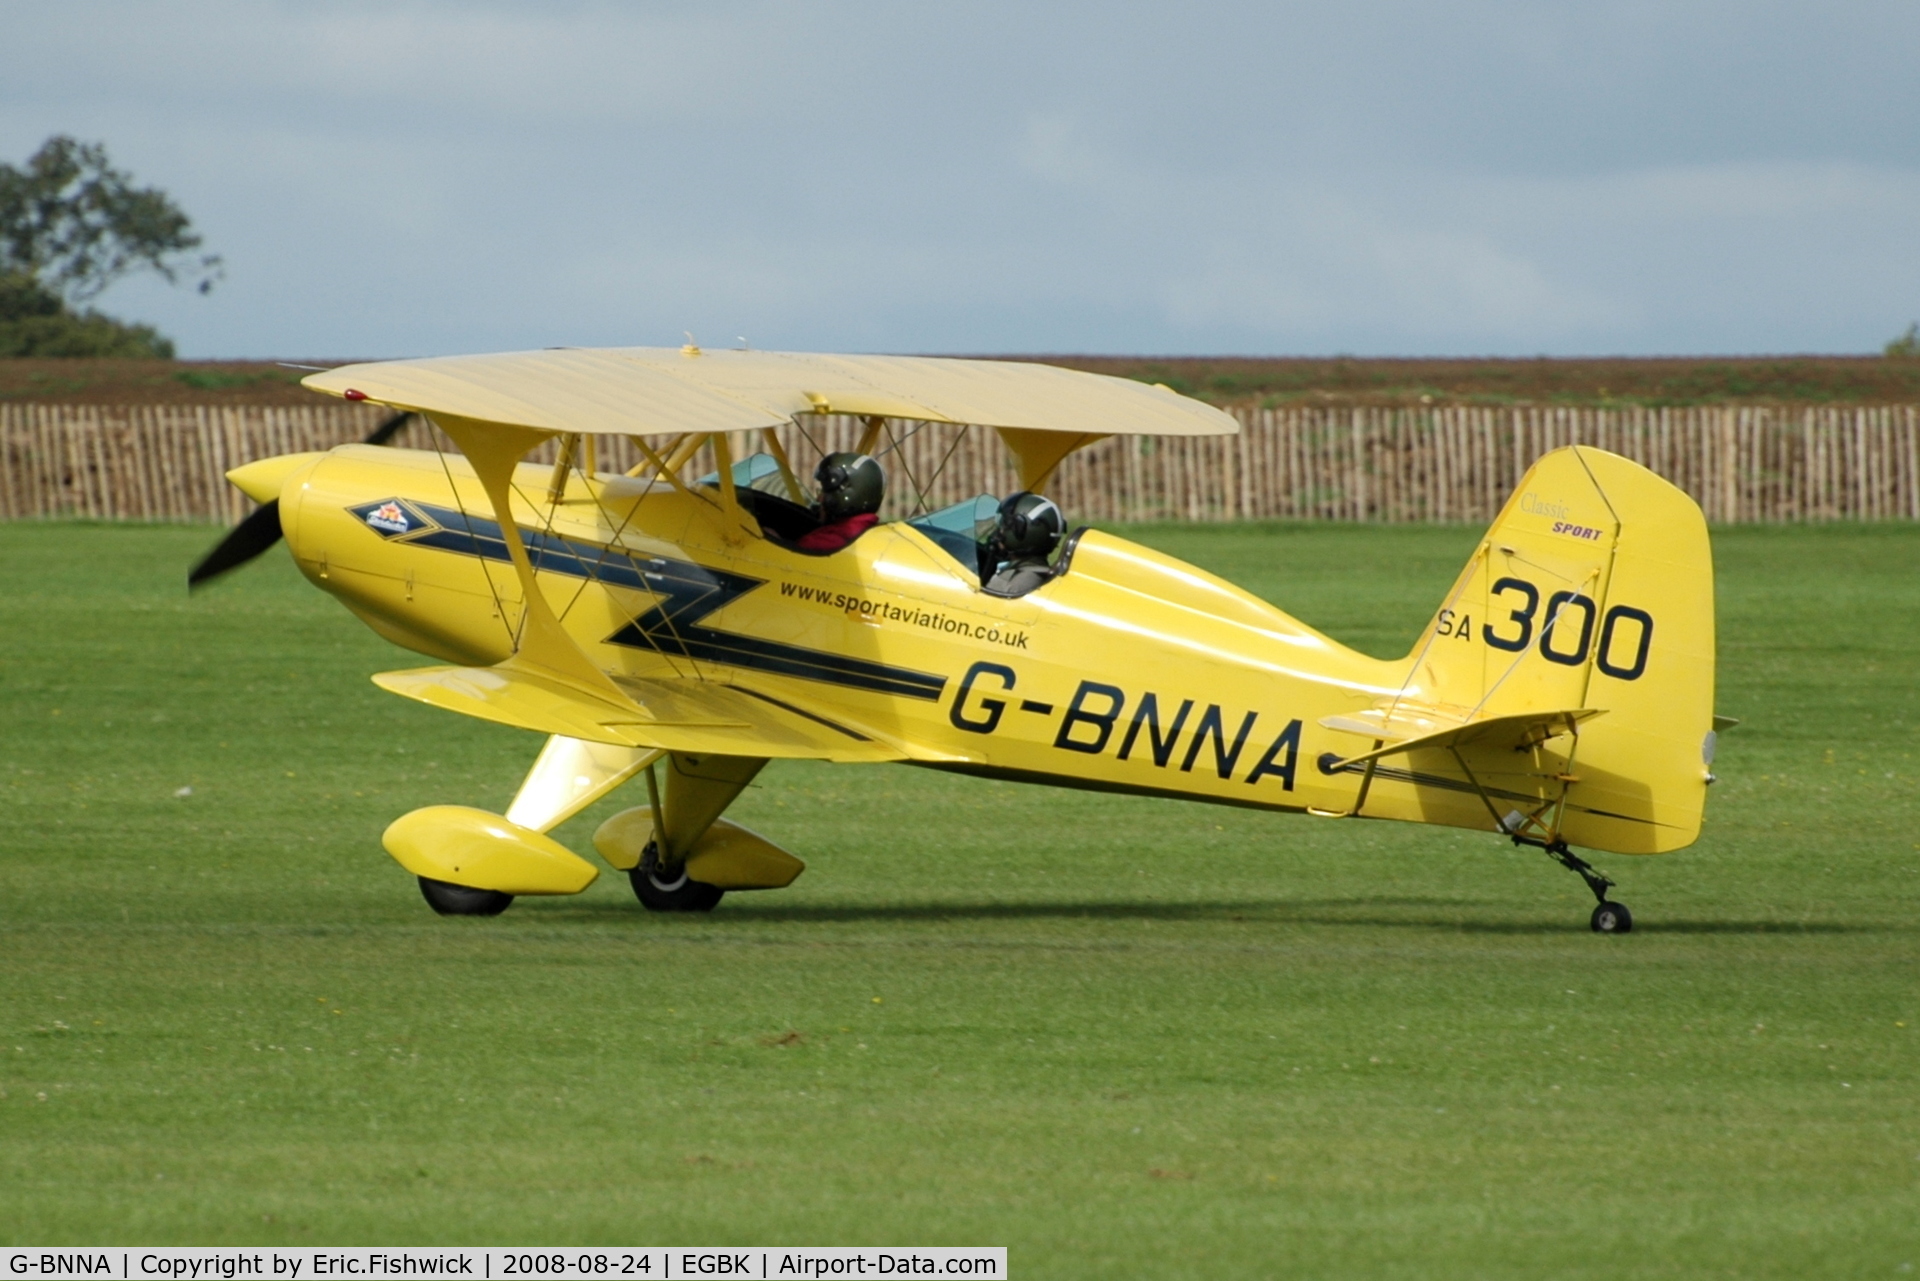 G-BNNA, 1973 Stolp SA-300 Starduster Too C/N 1462, 1. G-BNNA at Sywell Airshow 24 Aug 2008